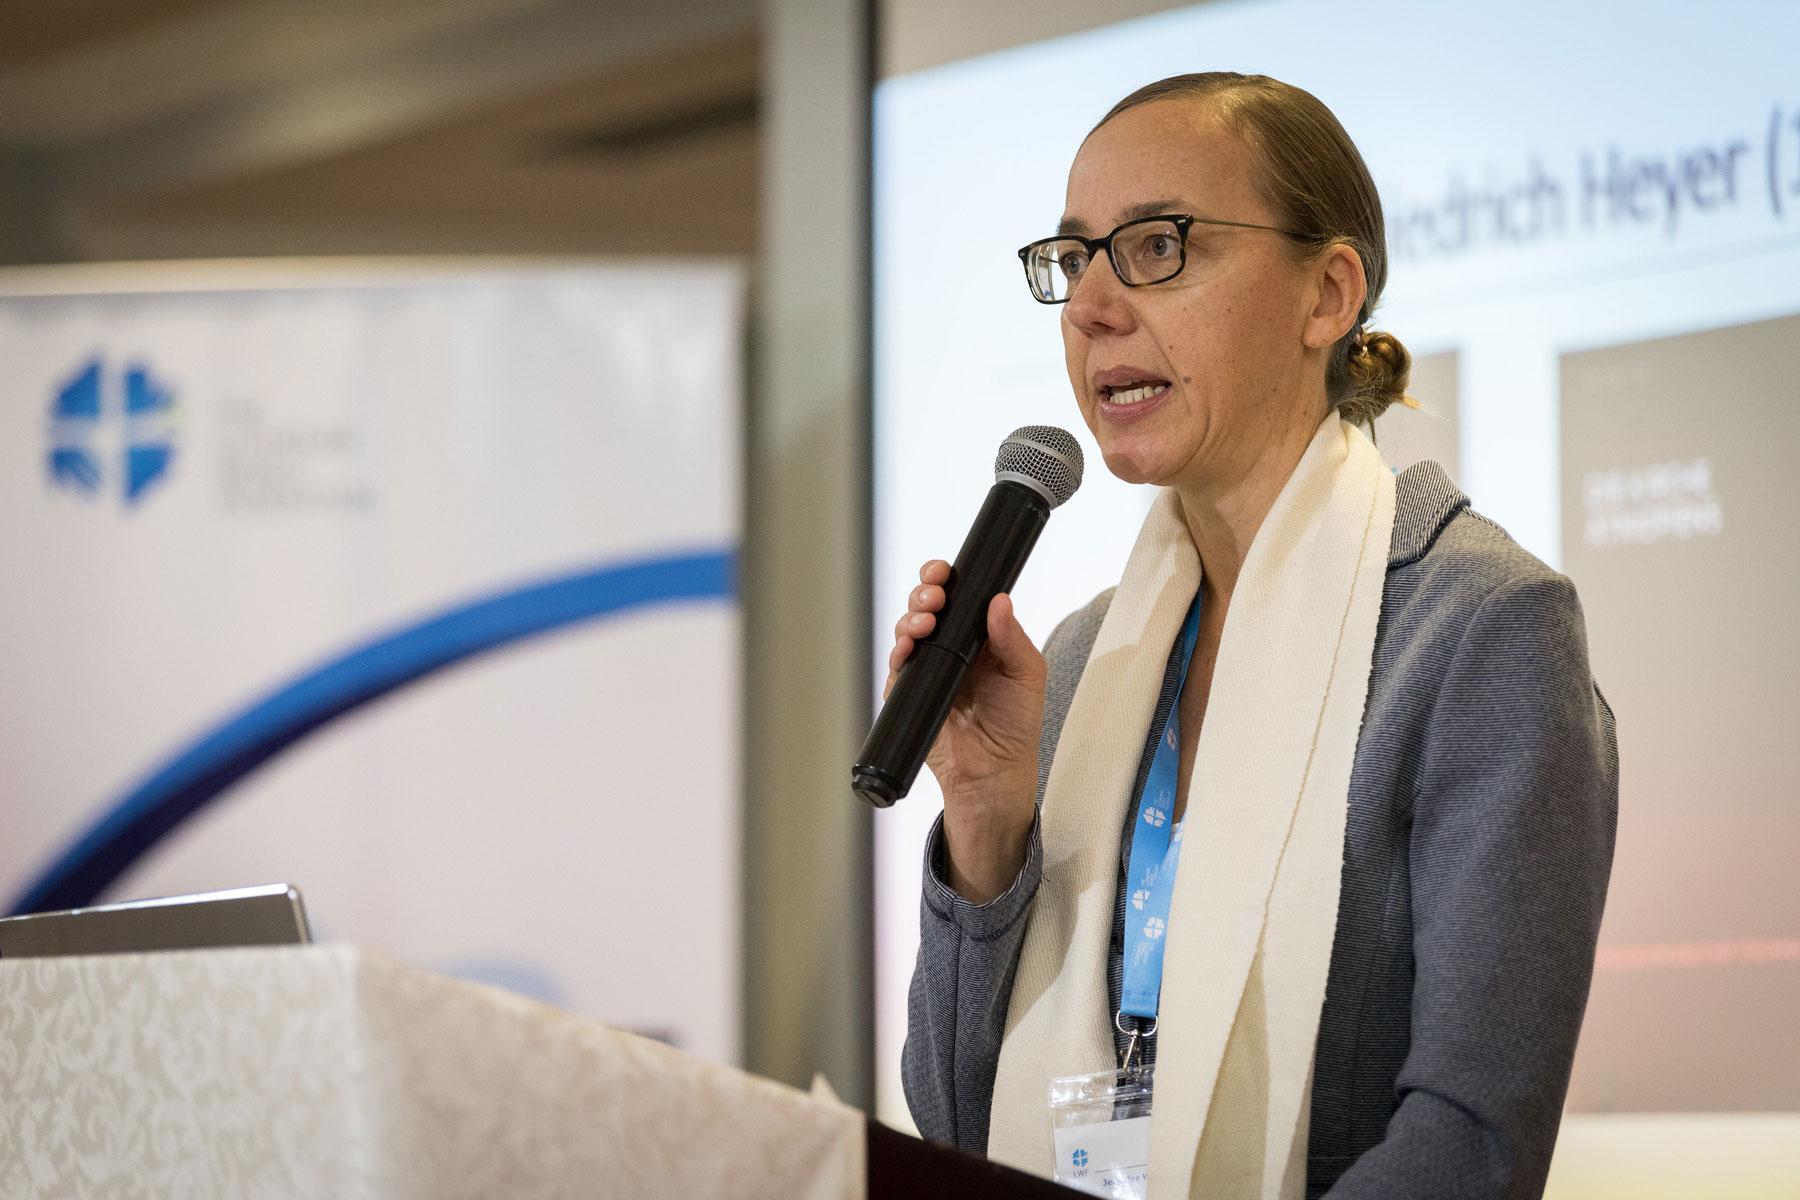 Prof. Dr Jennifer Wasmuth, Director of the Institute for Ecumenical Research in Strasbourg, France. Photo: LWF/Albin Hillert 